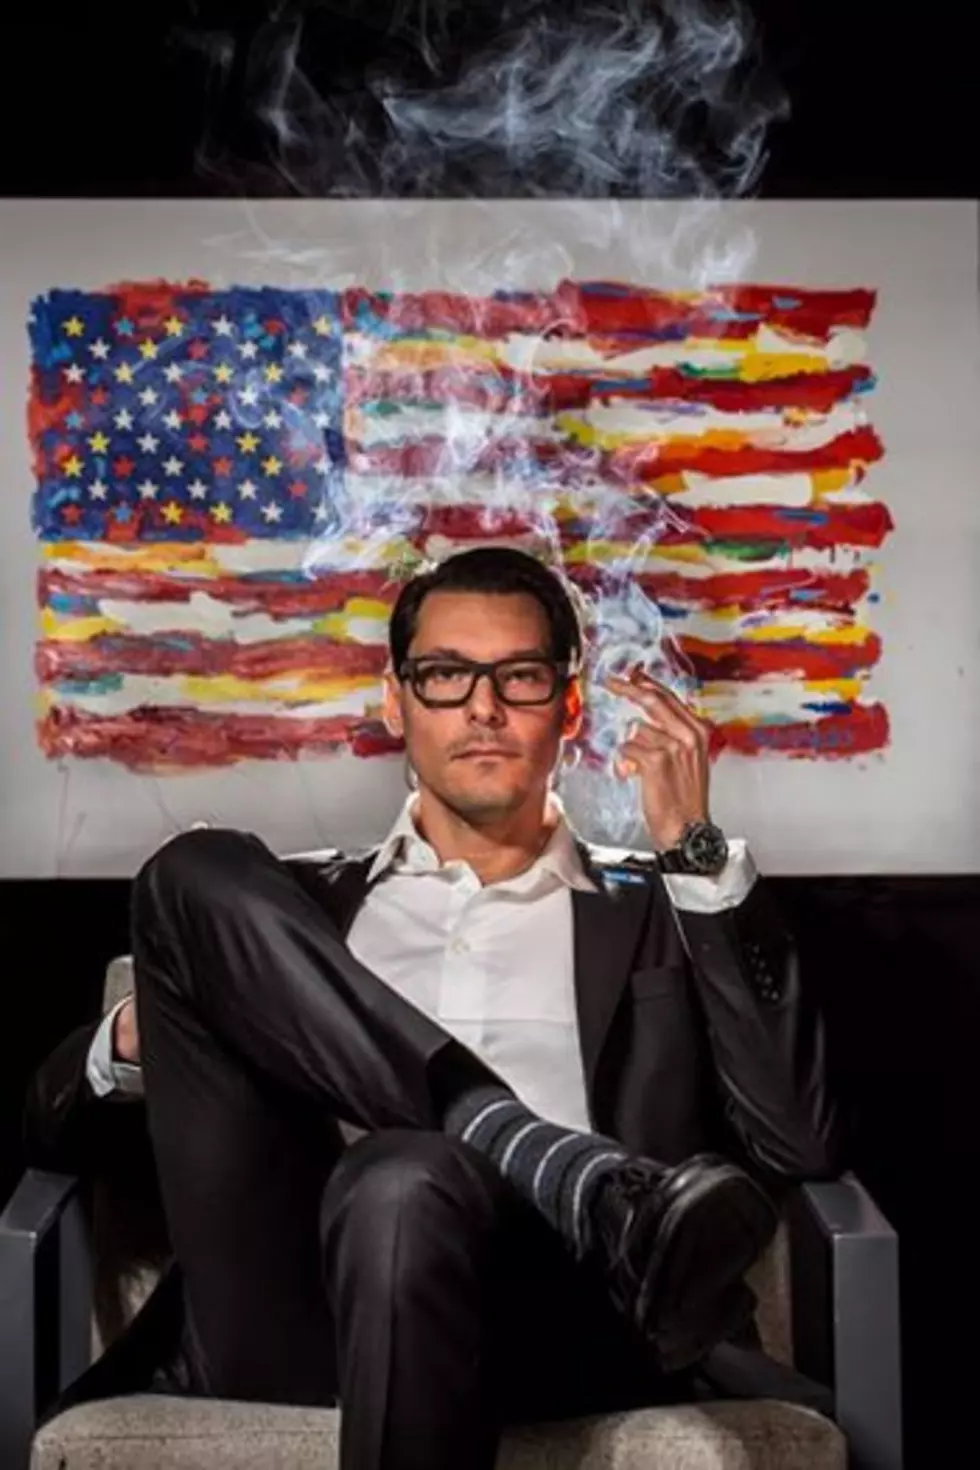 The &#8220;Canaibias Congressional candidate&#8221; smokes pot in new campaign photo